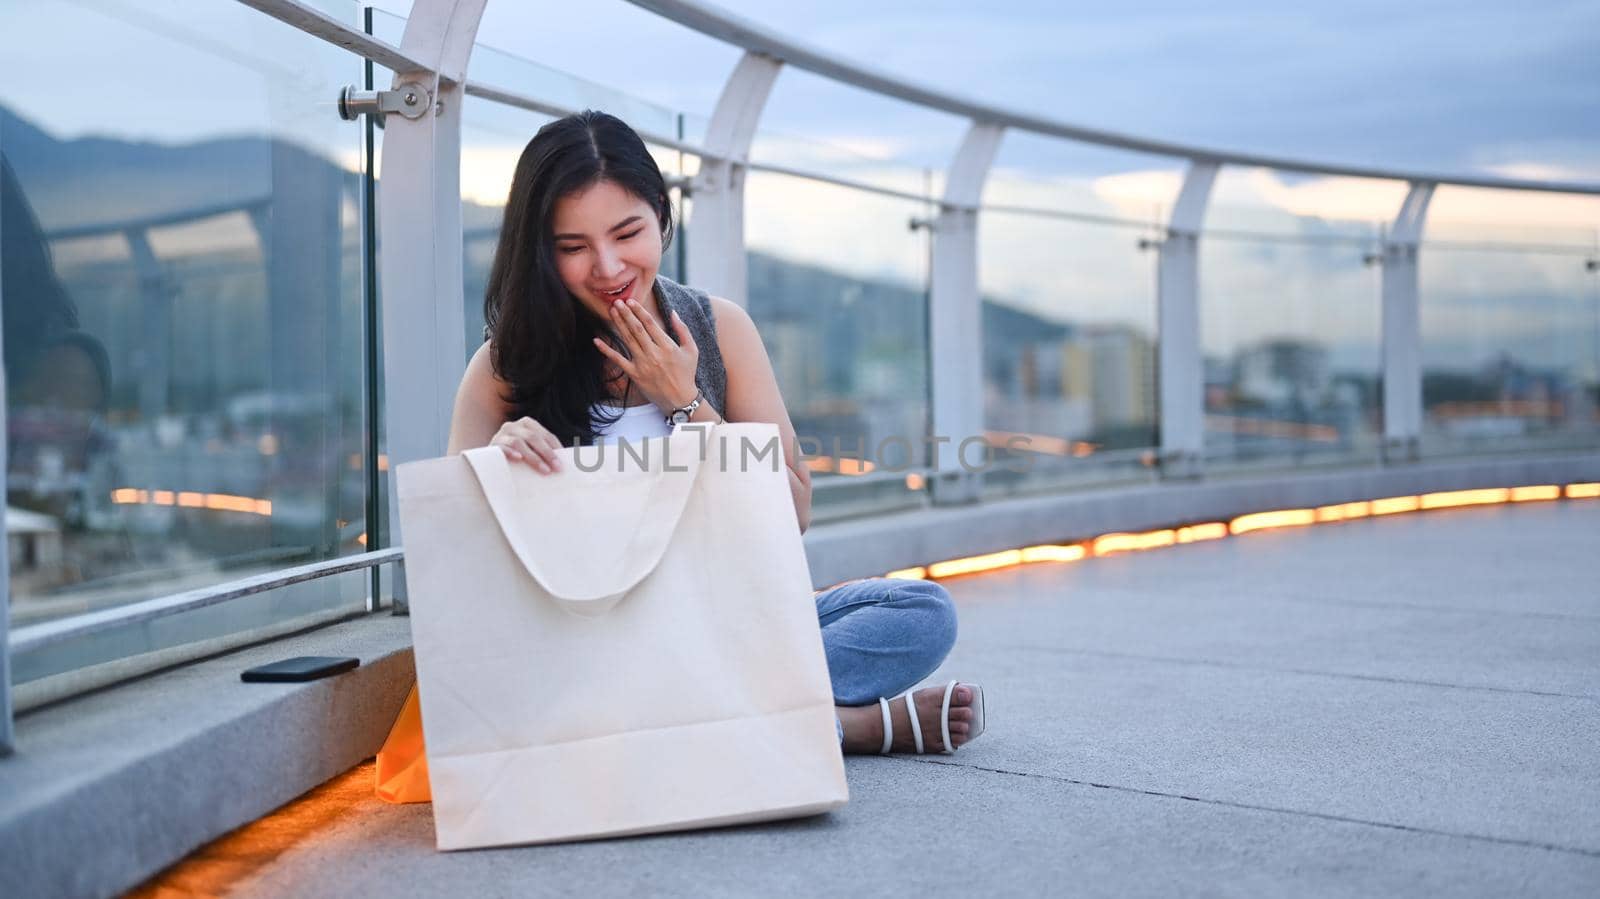 Surprised young woman sitting with shopping bags on rooftop terrace overlooking the city at sunset view in background by prathanchorruangsak